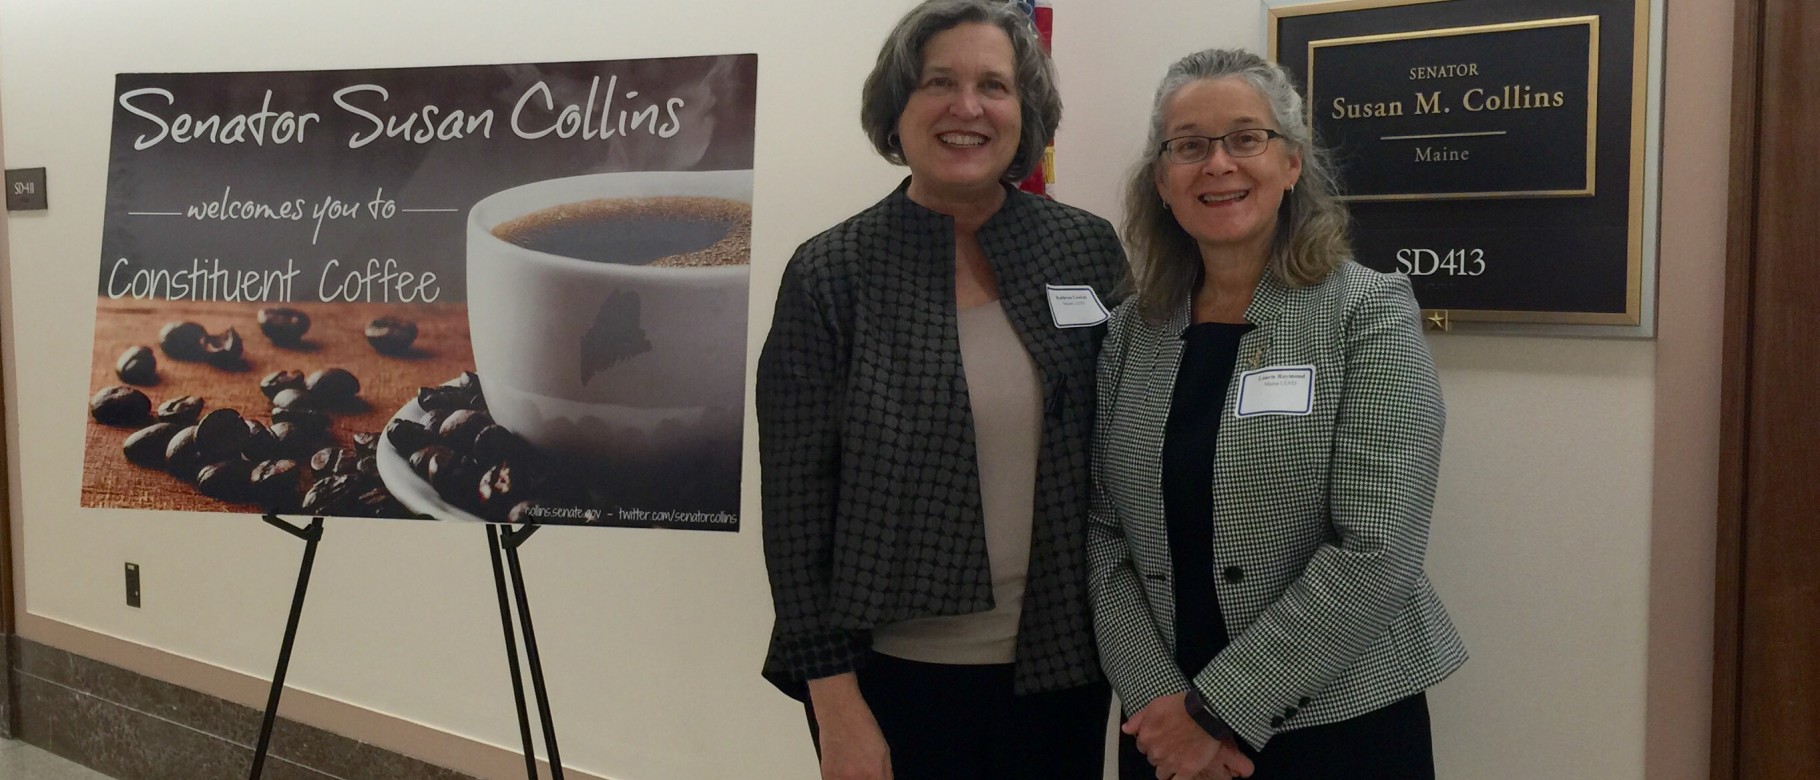 Kathryn Loukas and Laurie Raymond outside Senator Susan Collins' office in Washington, D.C.